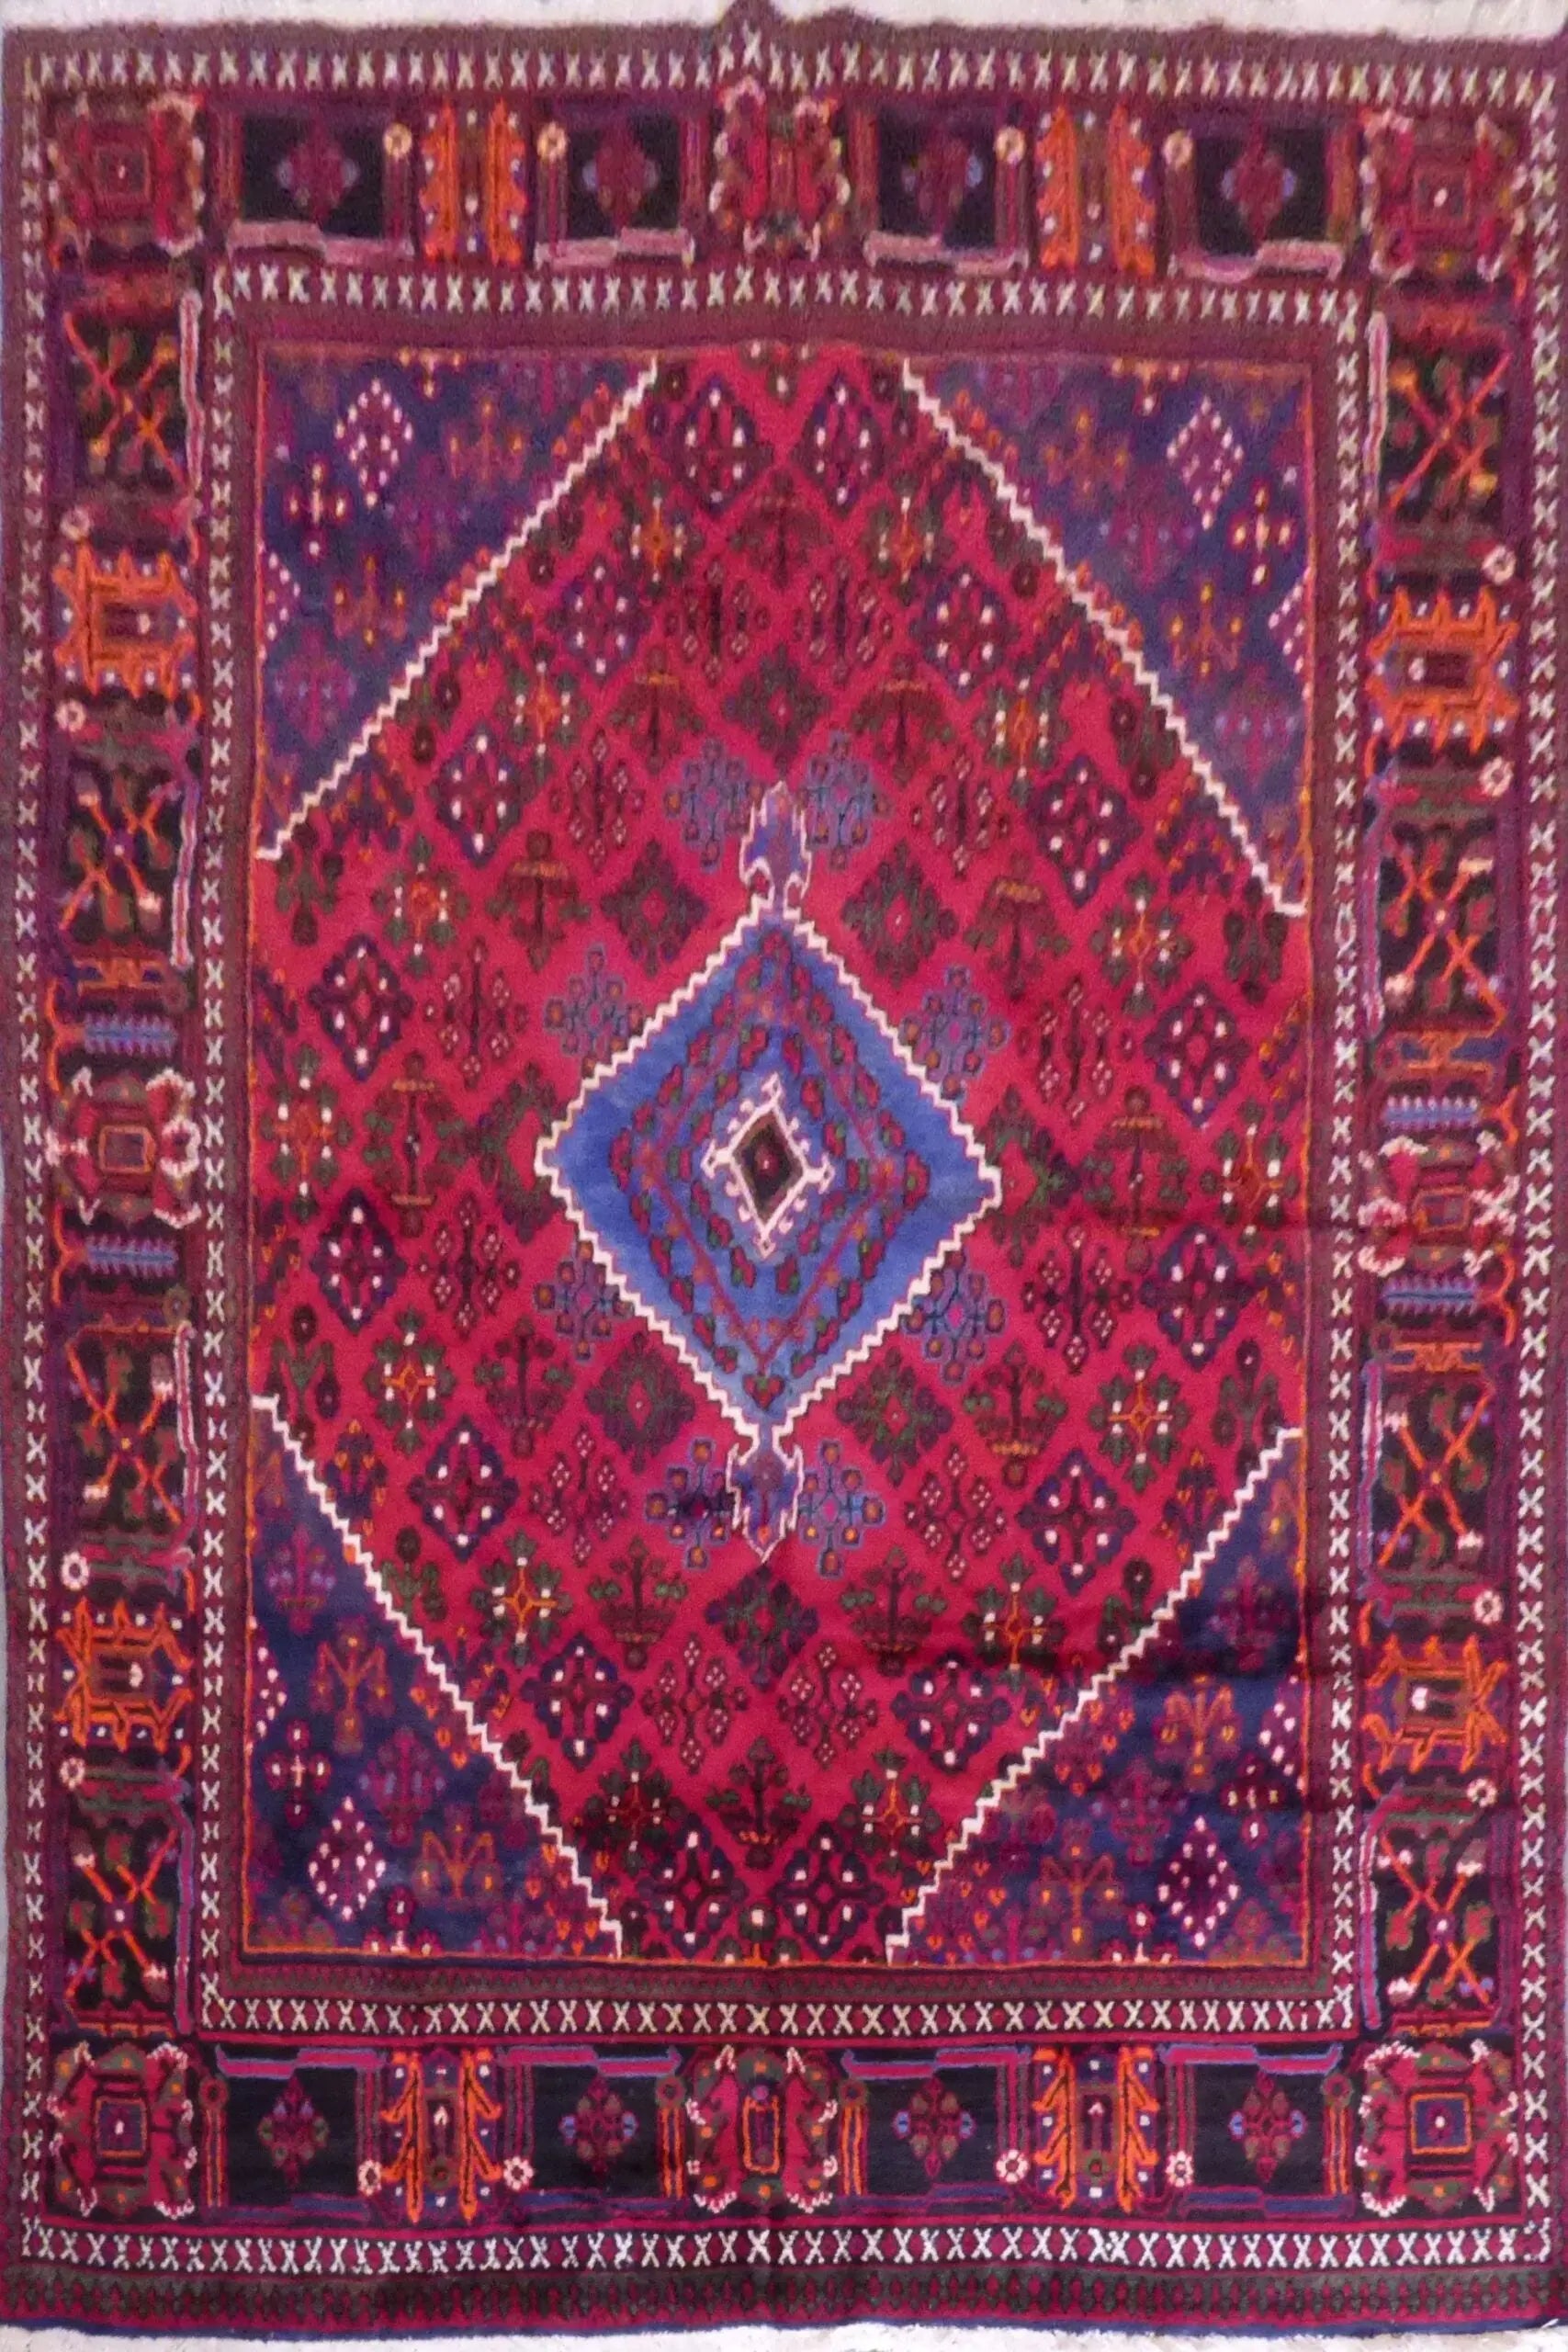 Antique Hand Knotted Persian Tabriz Rugs Wool & Cotton, Red, 10'2" X 7', Panr02492 (Red : 10594)